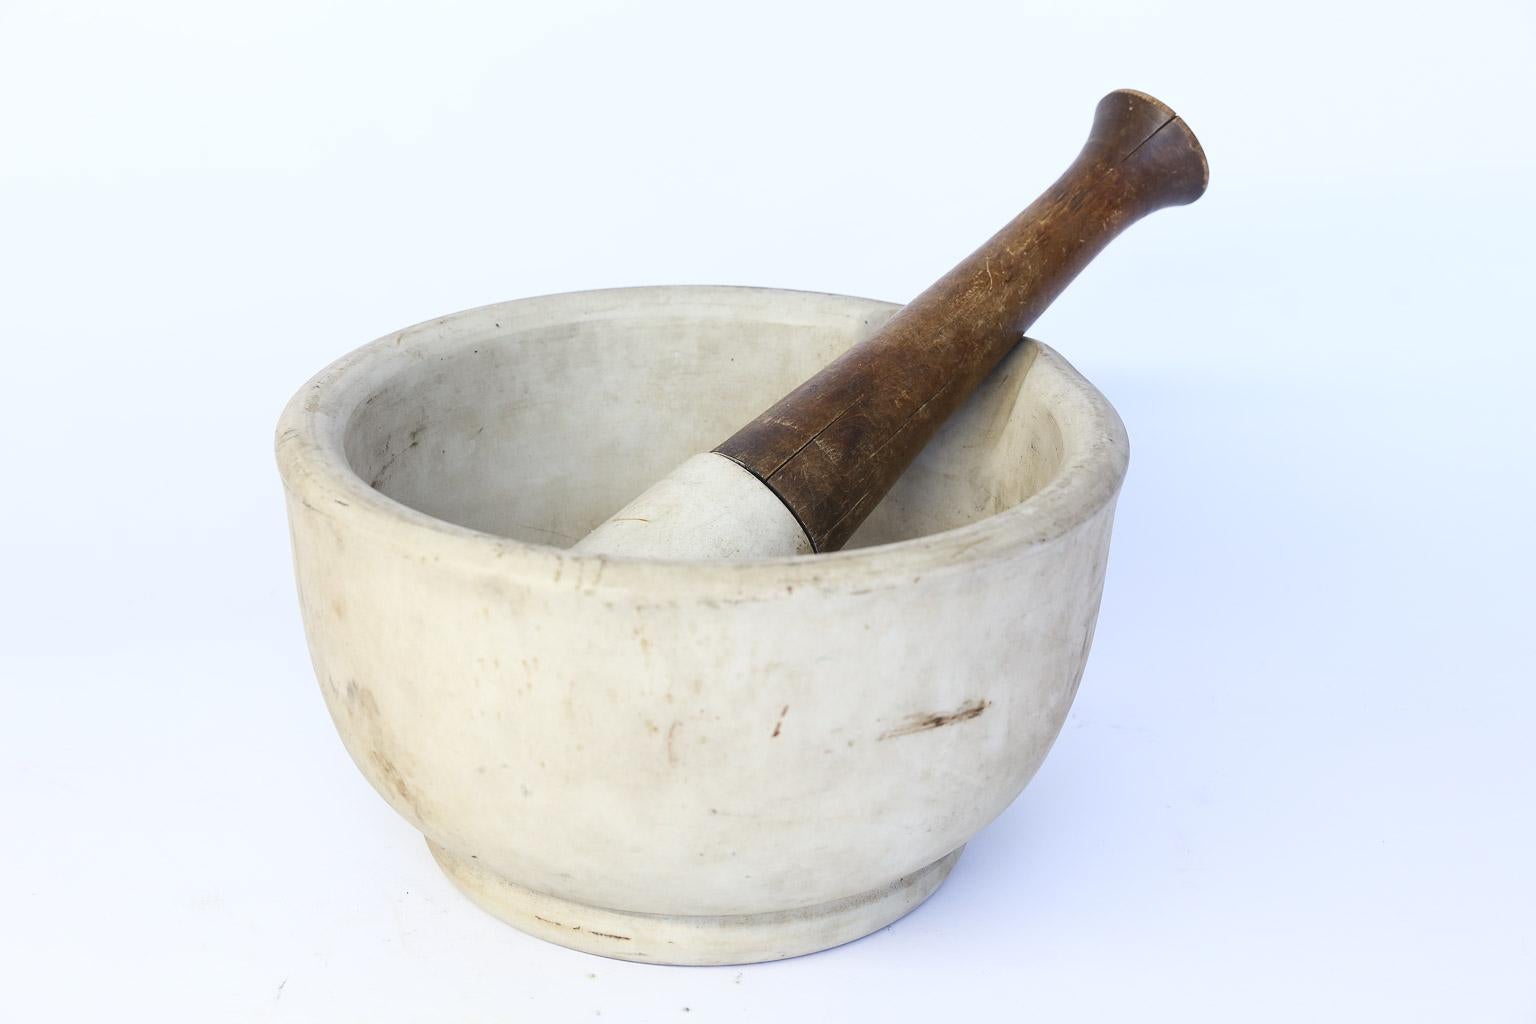 This is a generous size marble composition mortar and pestle from France. The pestle has a wood handle and measures 14.25 inches long and 3.25 inches in diameter. Dimensions for the mortar are given below. This is a perfect piece for any kitchen.